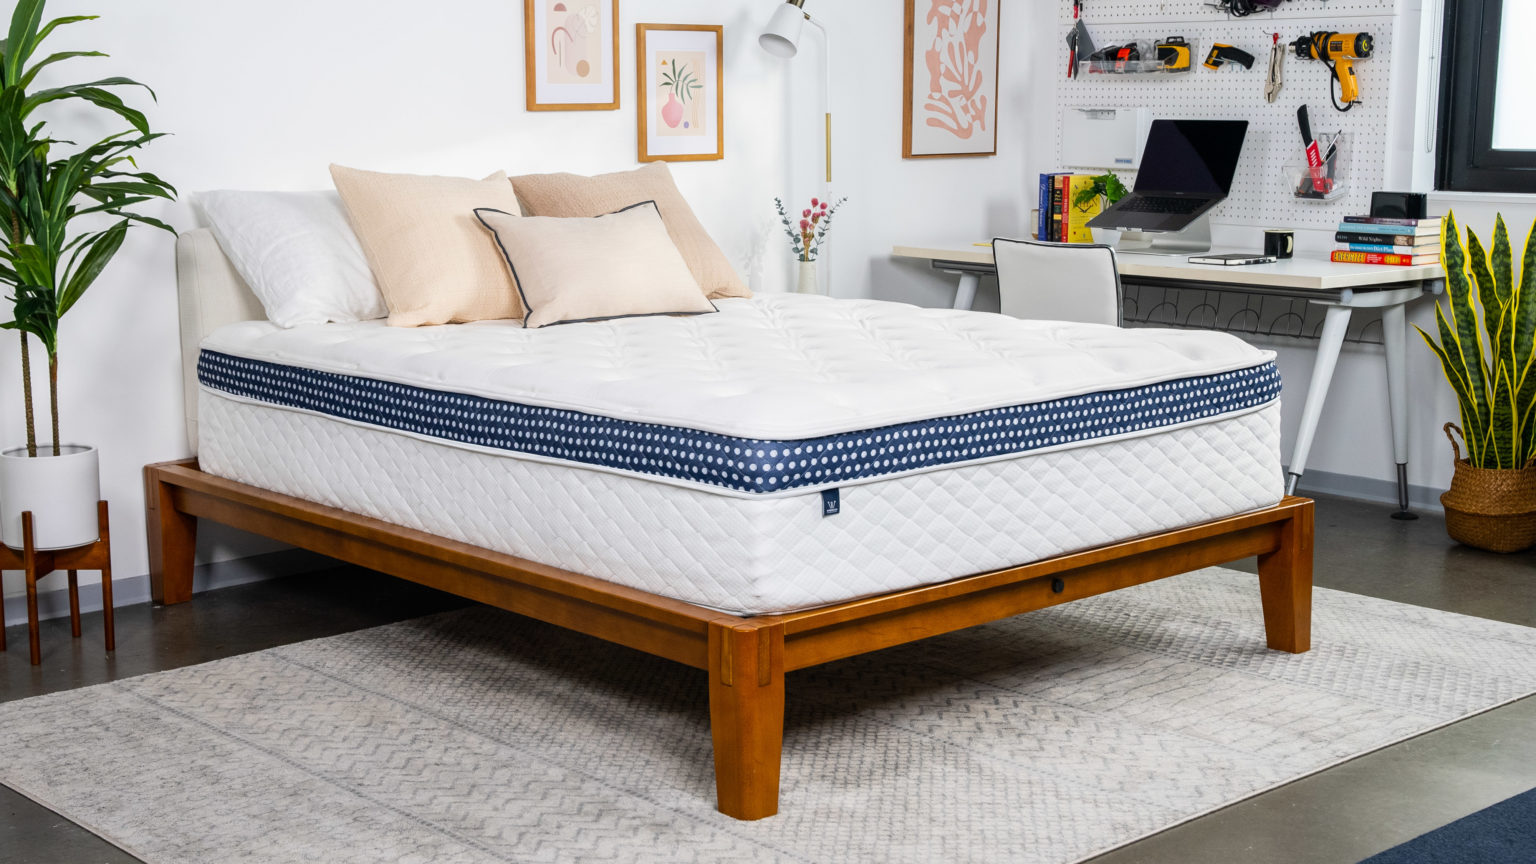 How To Get The Most Comfort From An Ultra Plush Mattress